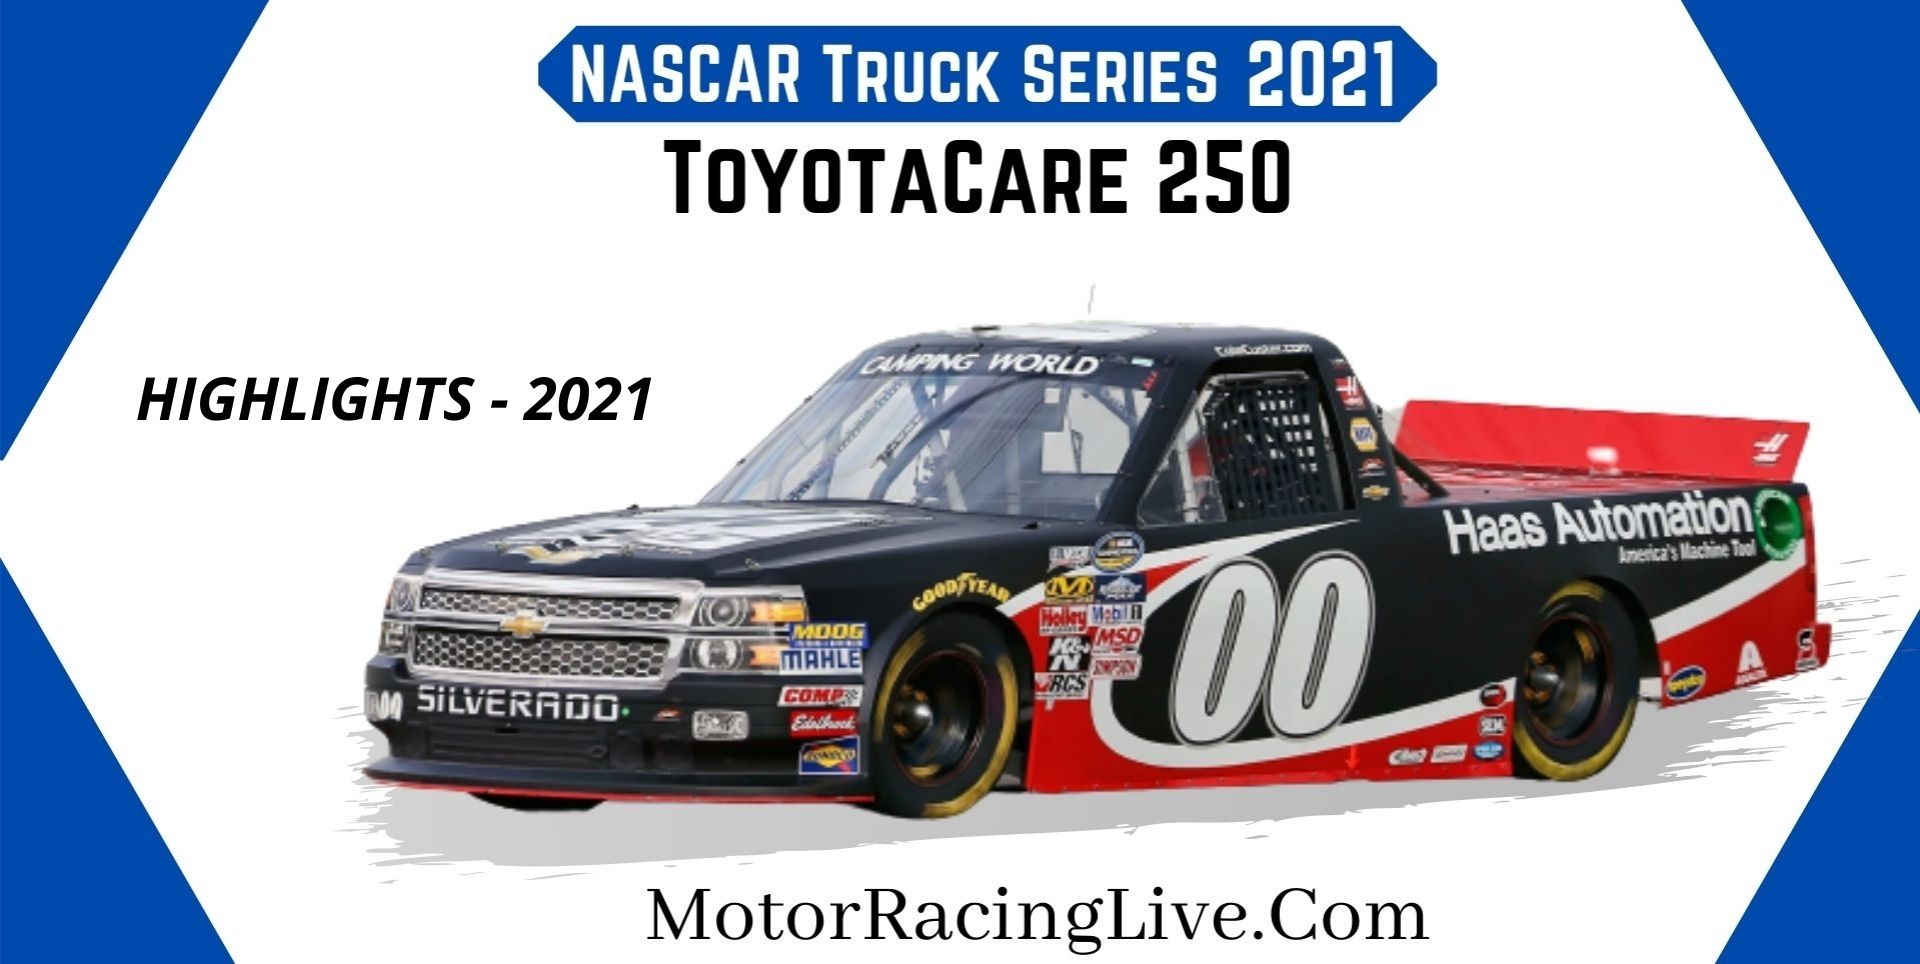 ToyotaCare 250 Highlights 2021 NASCAR Truck Series